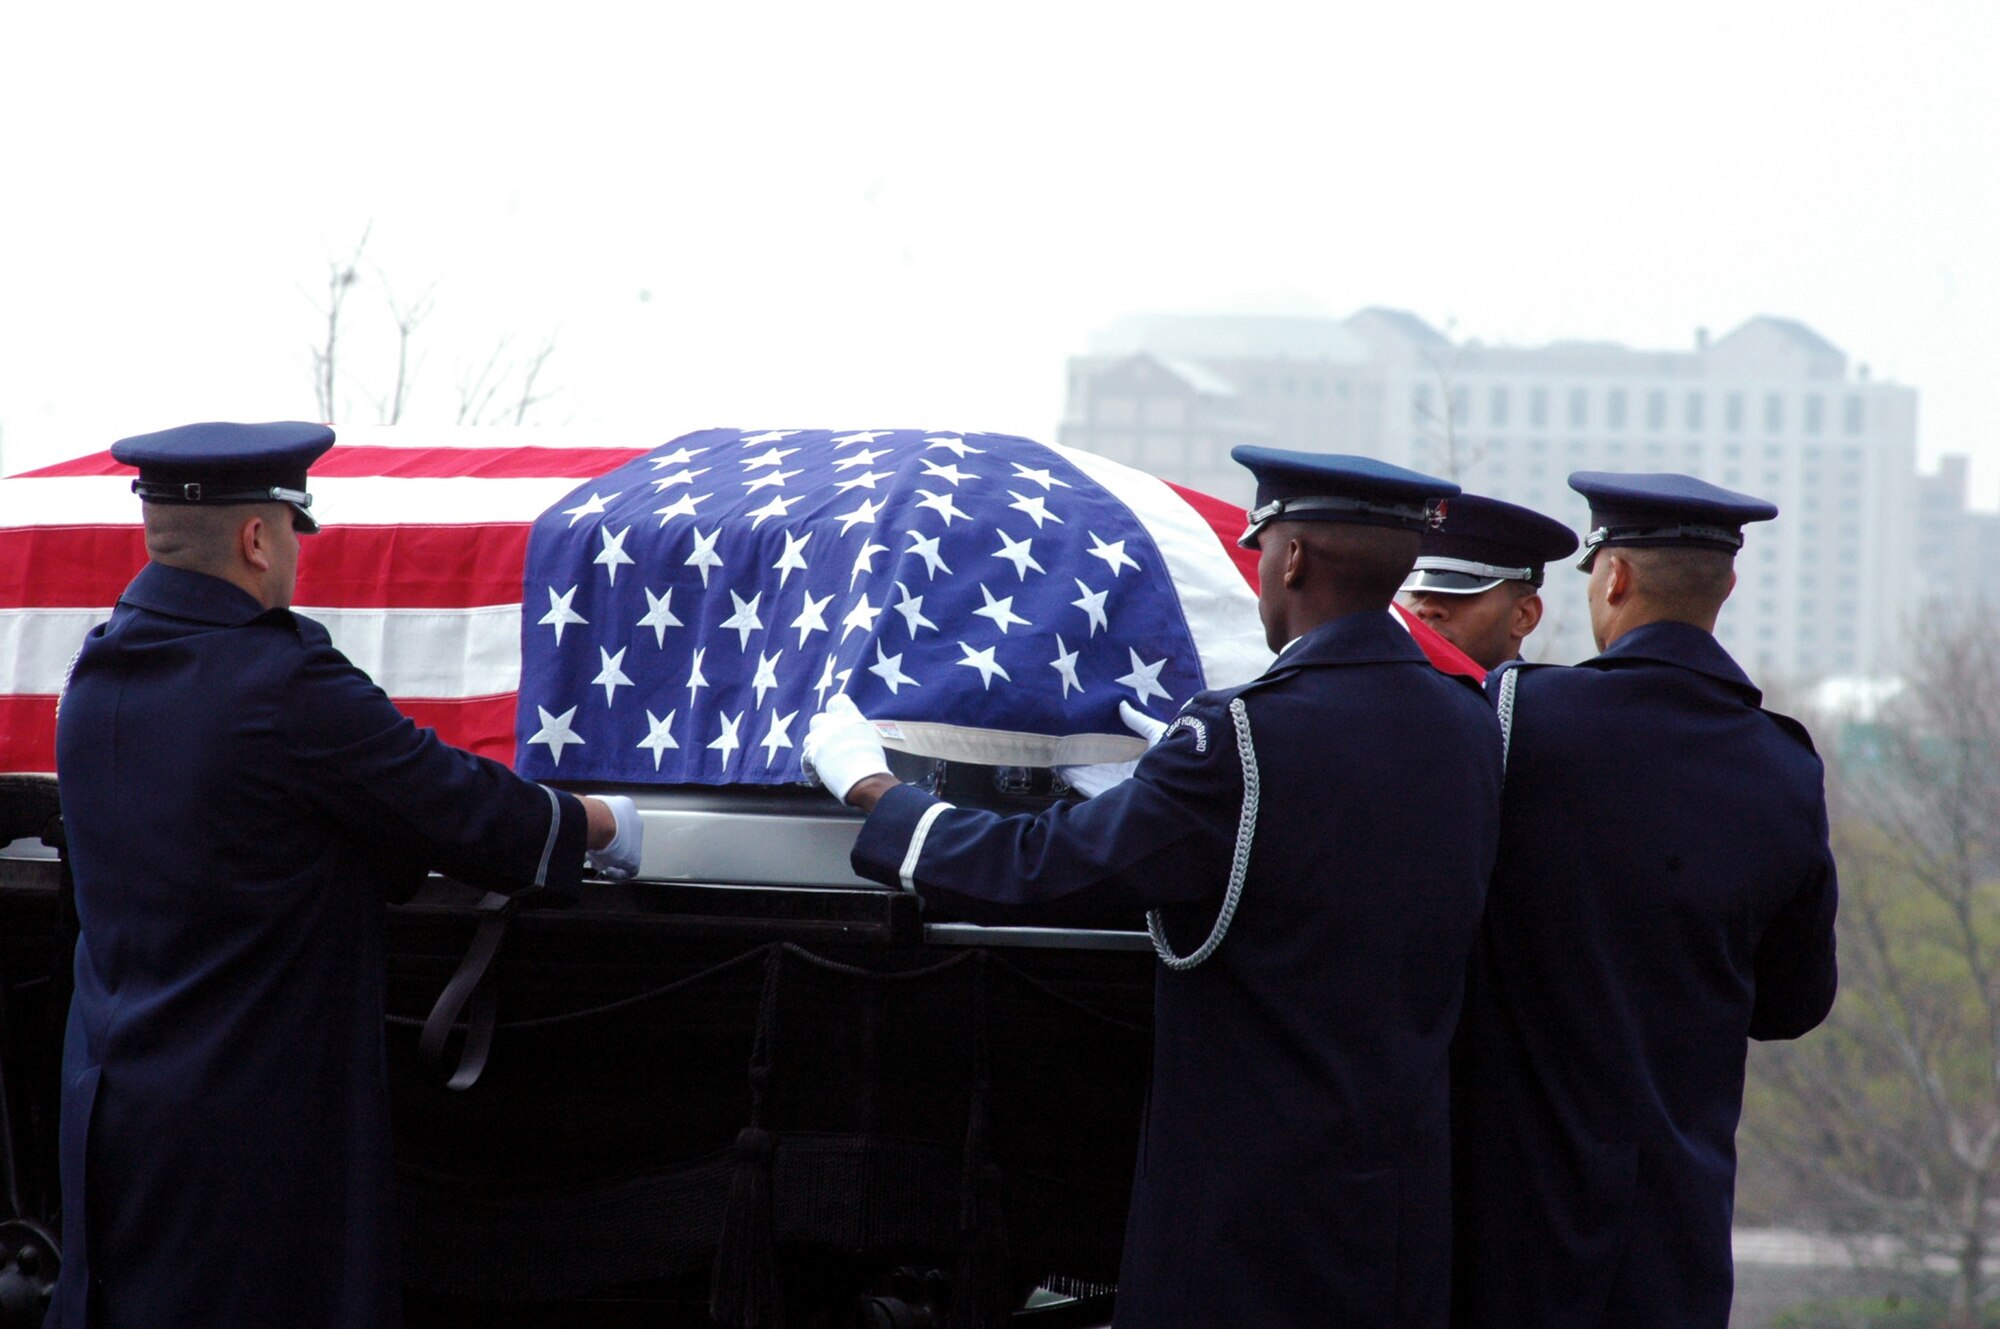 Airmen from the U.S. Air Force Honor Guard, Bolling Air Force Base, D.C., participate in the funeral for Air Force Maj. Robert F. Woods April 9, 2008, at Arlington National Cemetery, Va.  Major Woods, a former pilot who crashed in Vietnam on June 26, 1968, was laid to rest at the cemetery nearly 40 years after he disappeared.  (U.S. Air Force Photo/Tech. Sgt. Scott T. Sturkol)